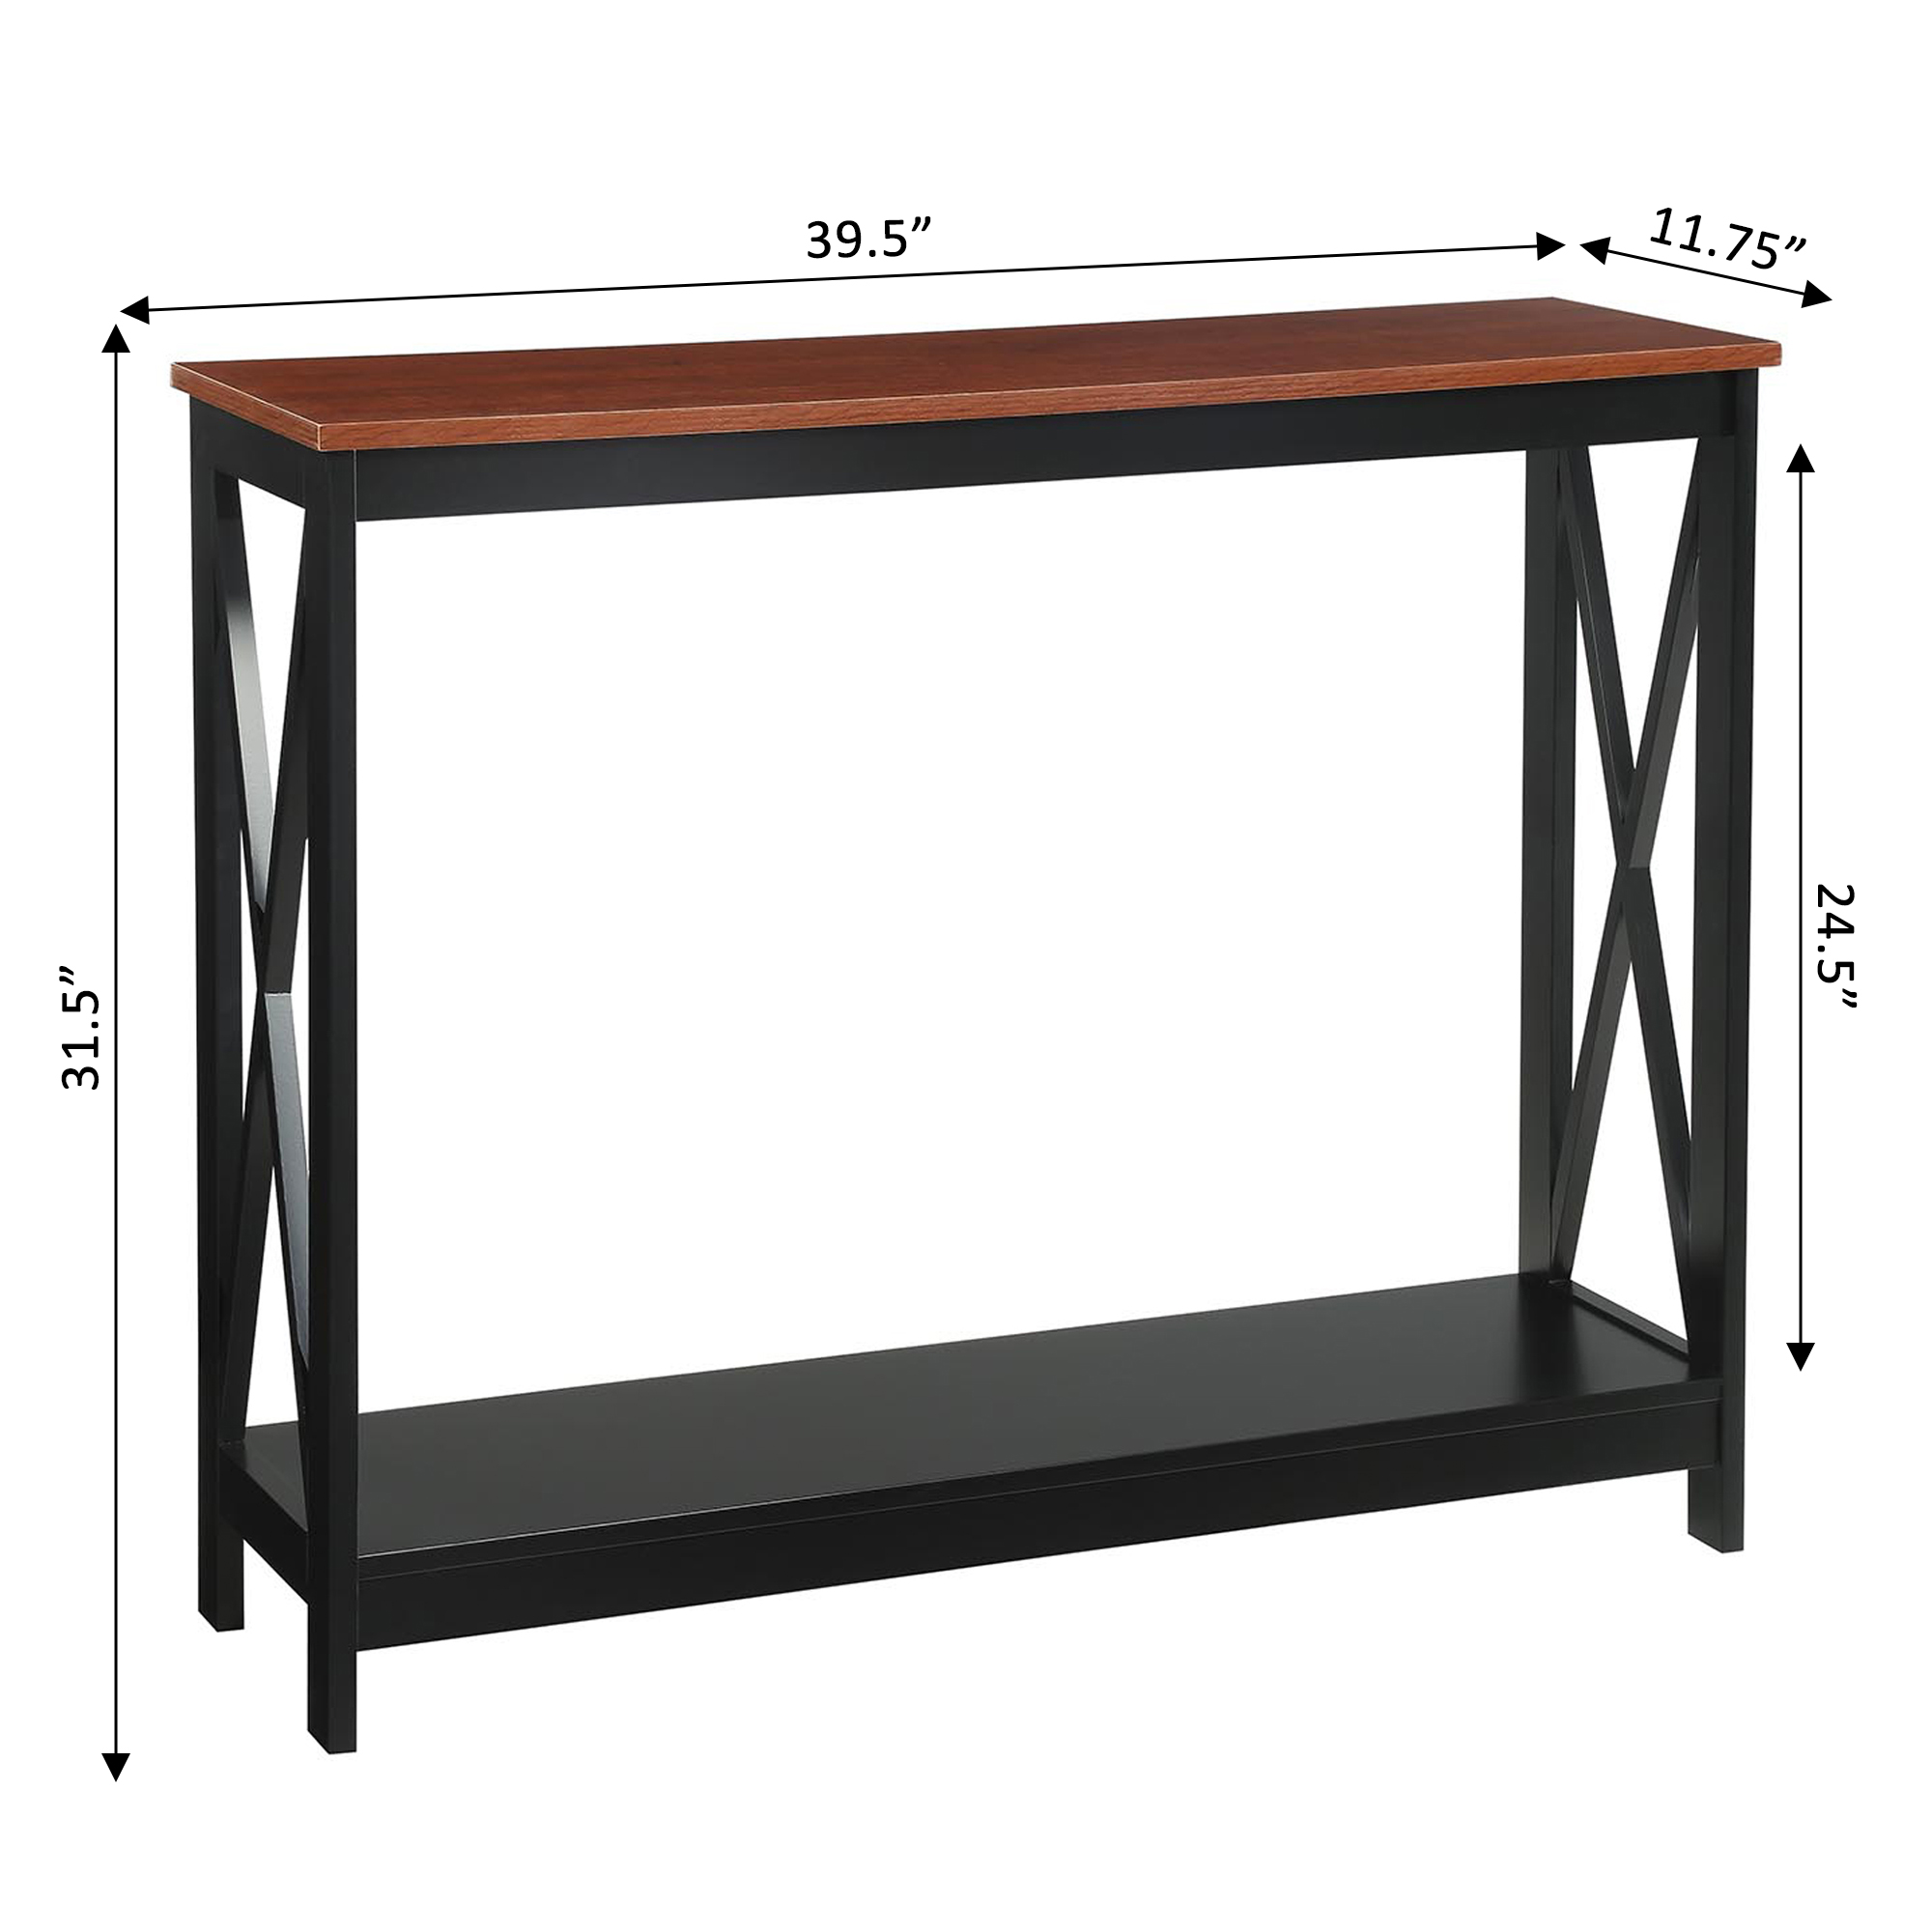 Convenience Concepts Oxford Console Table with Shelf, Cherry/Black ...